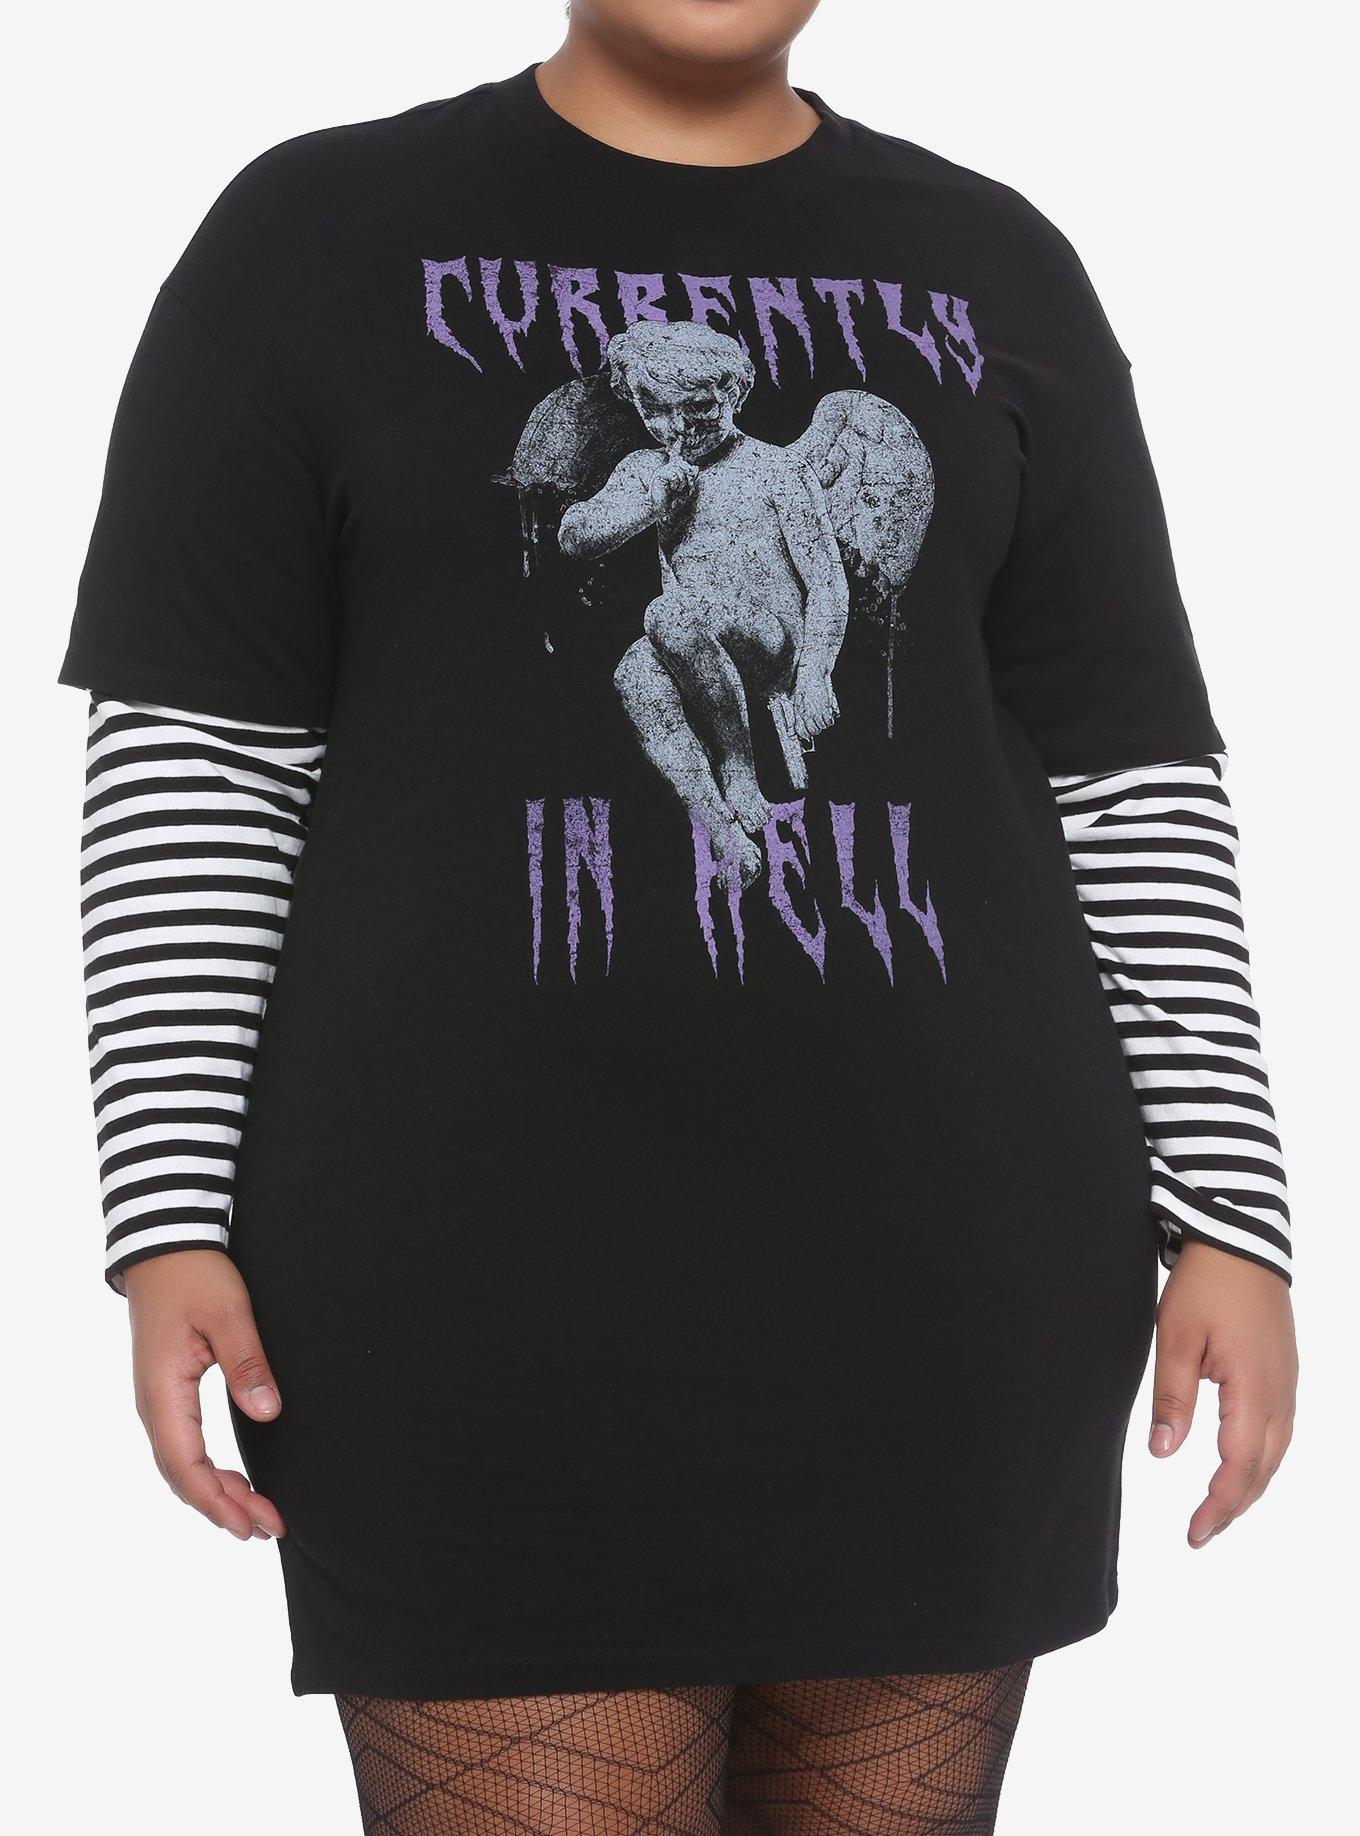 Currently In Hell Long-Sleeve T-Shirt Dress Plus Size, BLACK WHITE STRIPE, hi-res